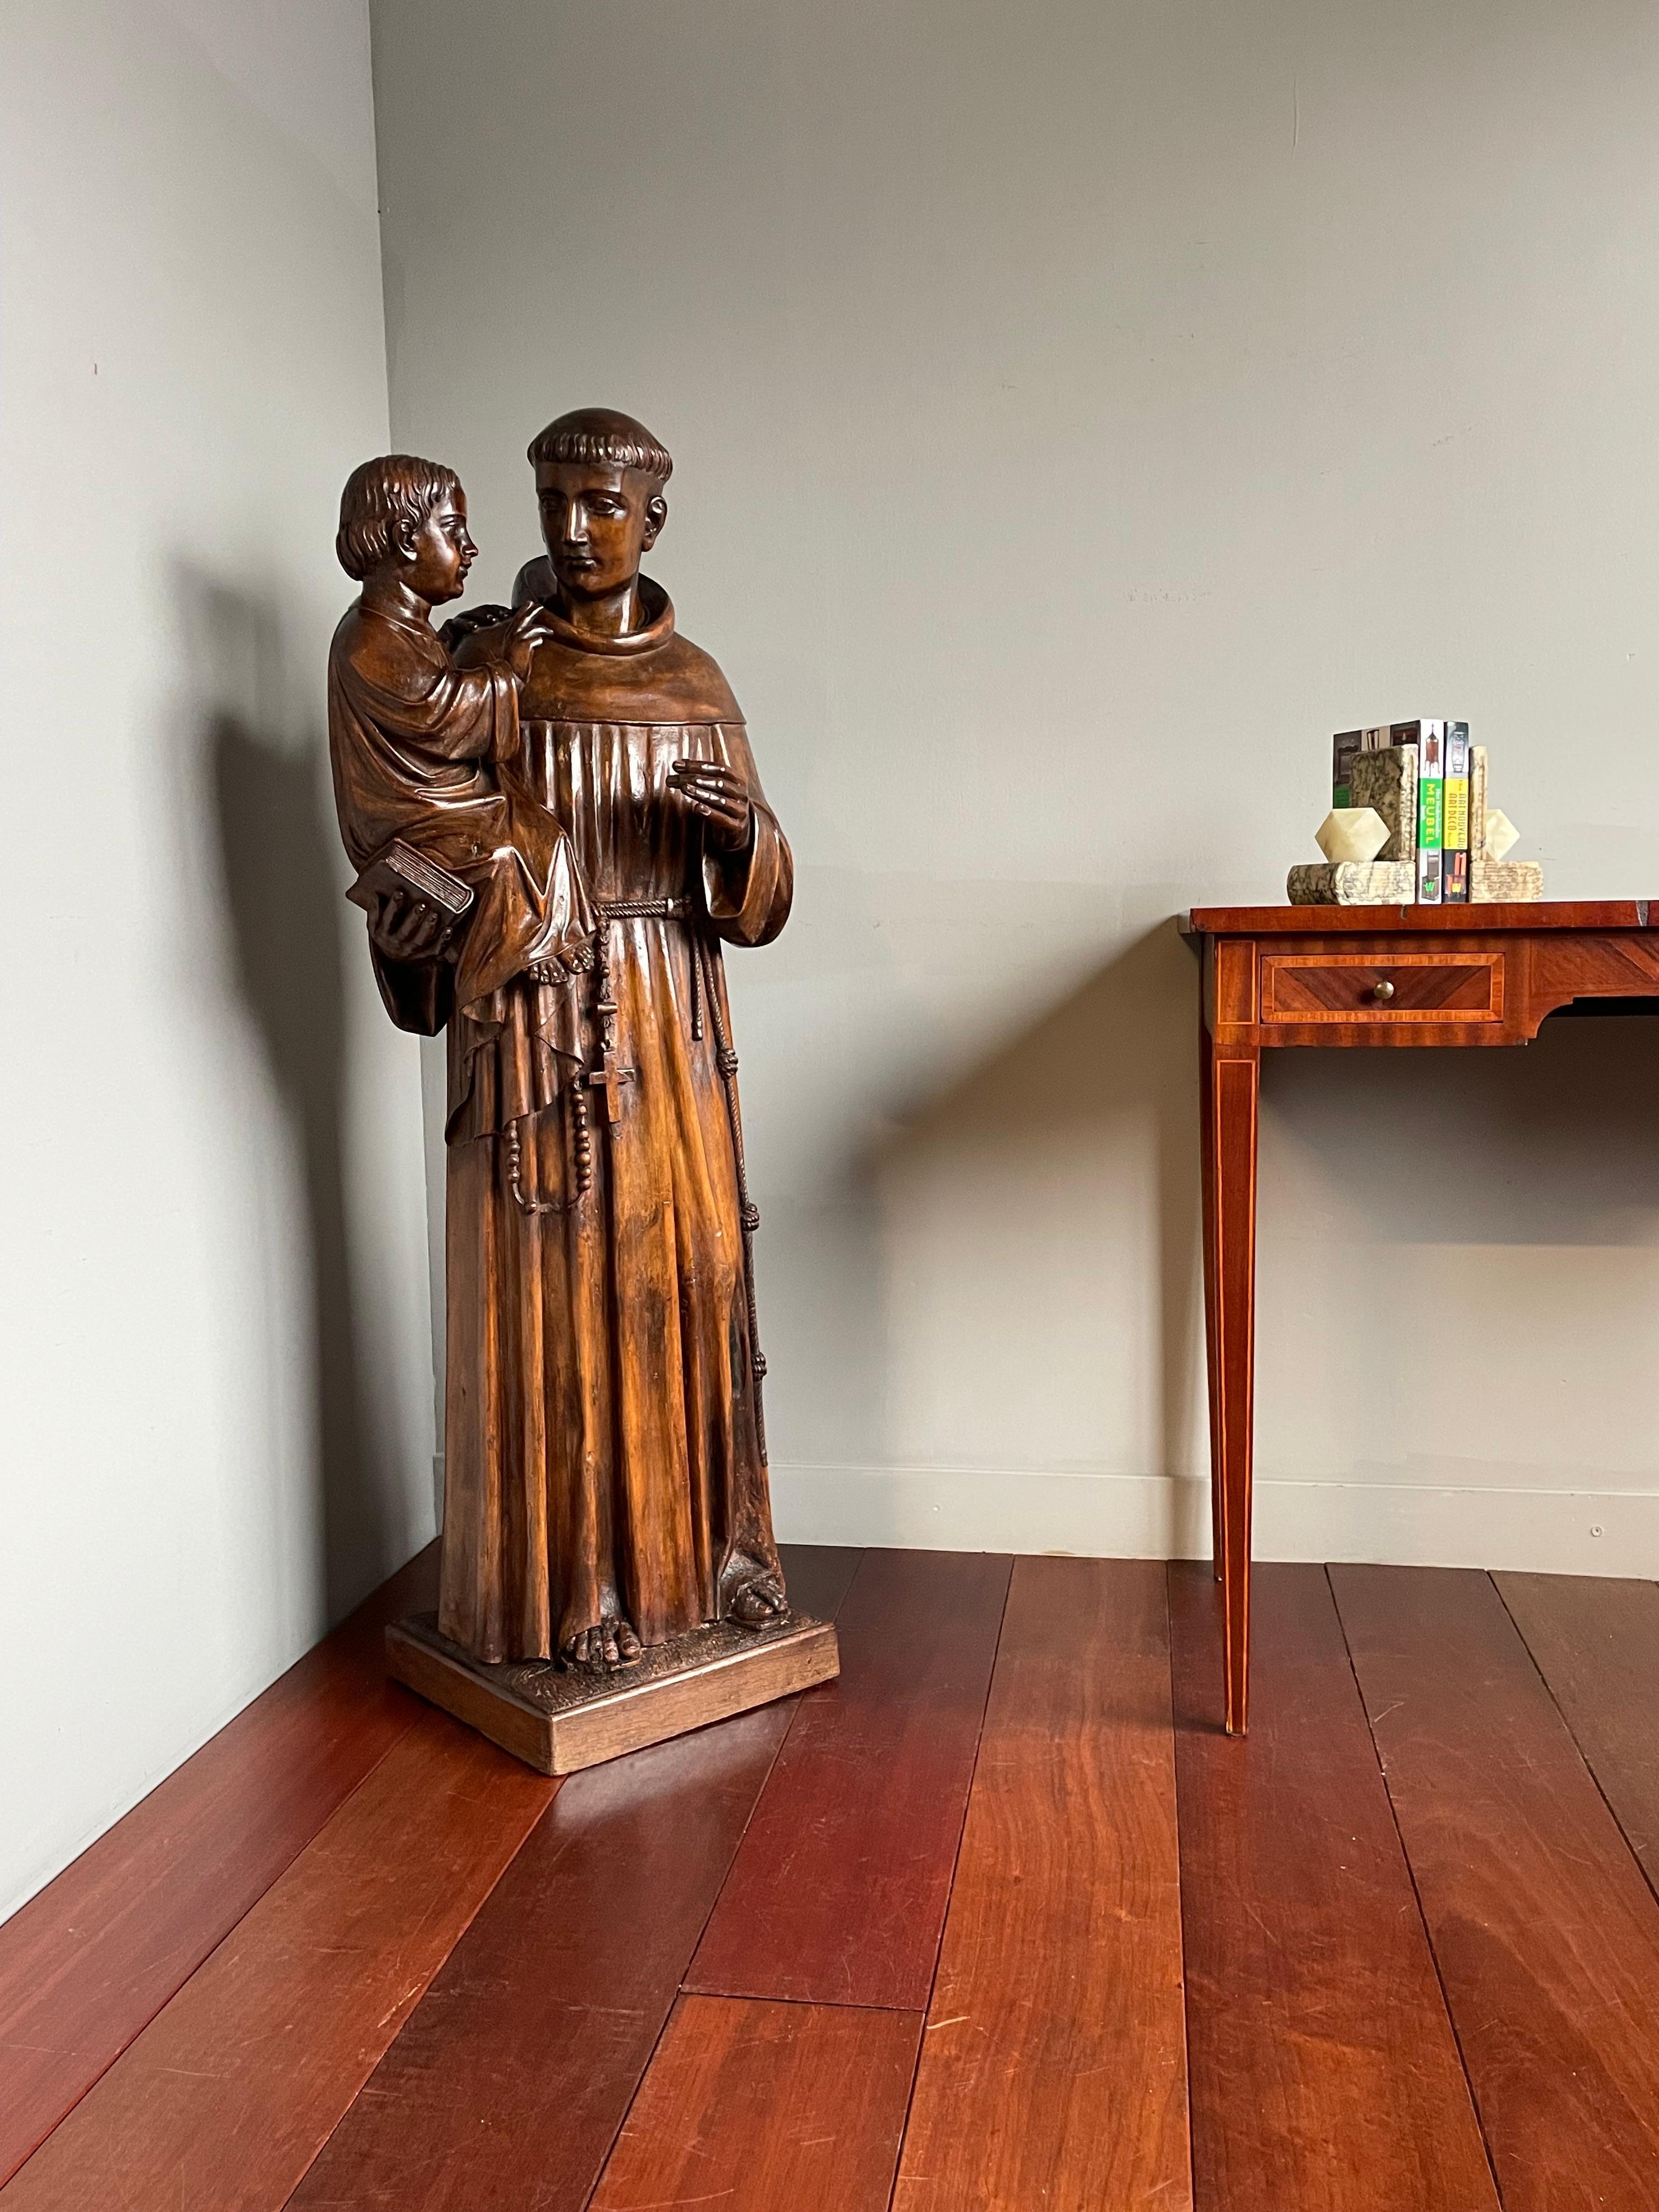 4 feet tall, finest quality carved, antique, former Catholic church or Franciscan monastery sculpture.

This rare church or monastery statue of Saint Anthony of Padua holding the Child Jesus is in very good condition. This work of religious art is